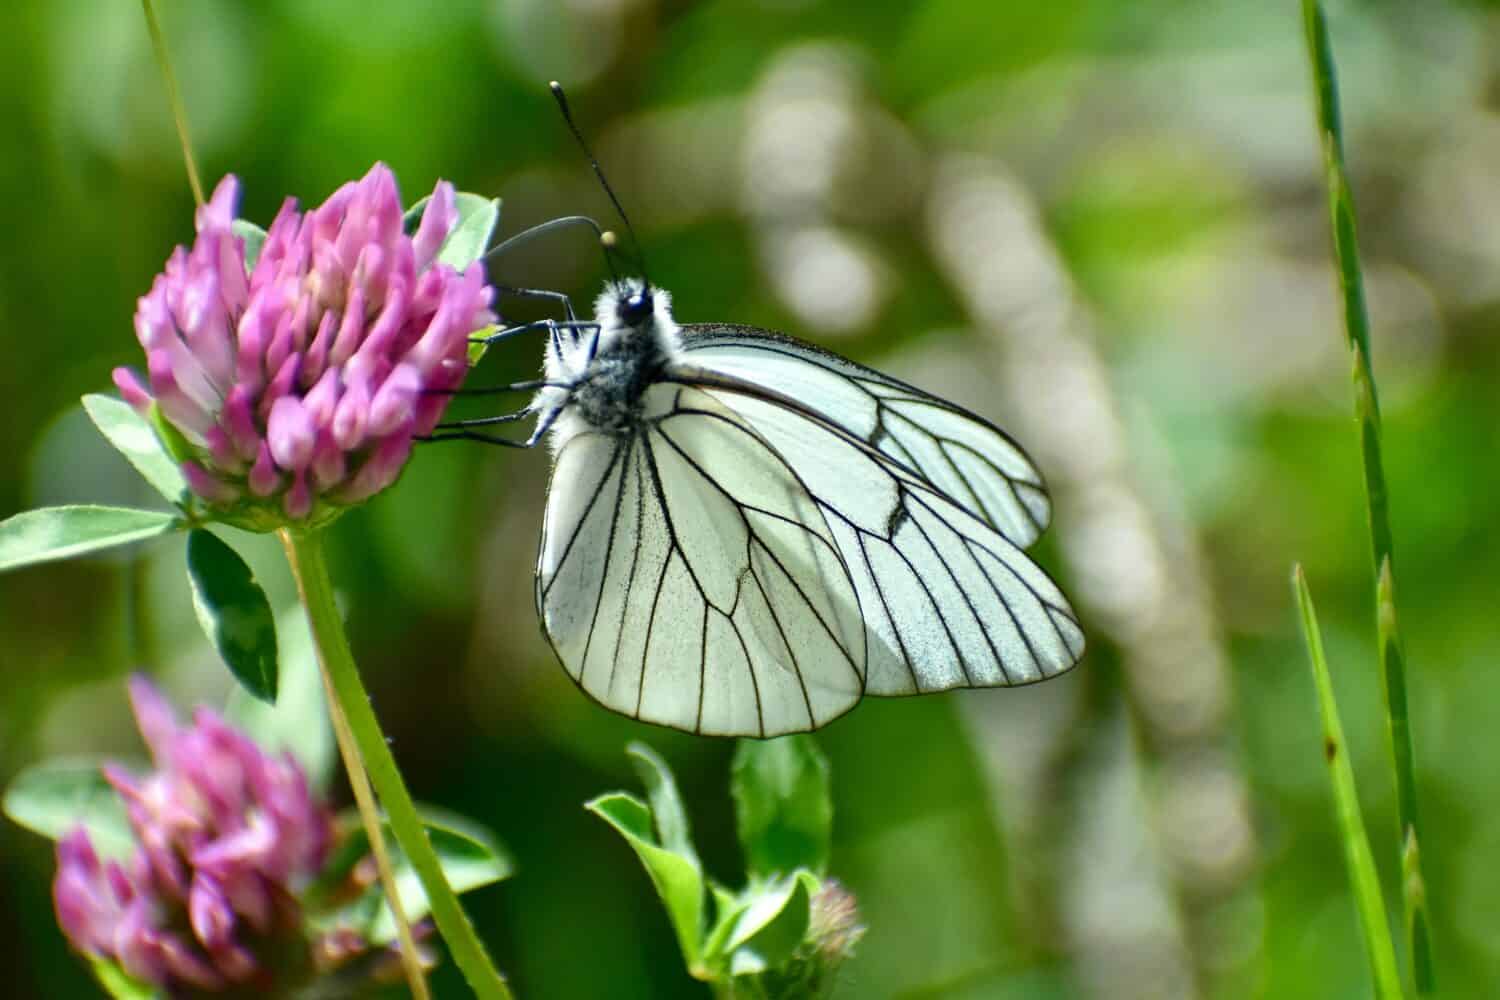 A black-veined white butterfly on the purple flower of clover in the sun light. The rarest butterfly fluttering around England. 